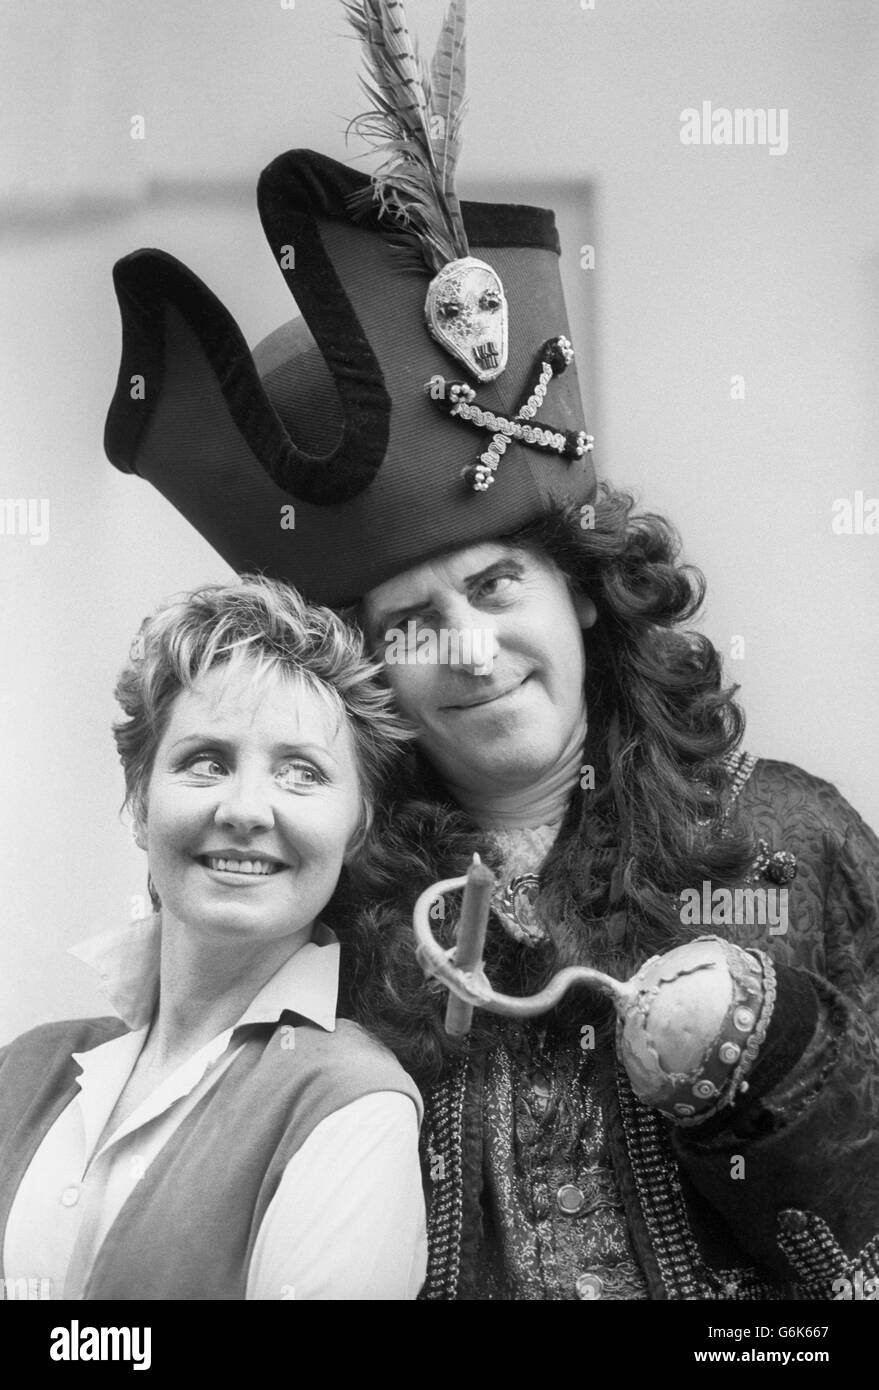 Singer Lulu plays Peter Pan and actor George Cole plays the evil Captain Hook in a Pantomime for the festive season at London's Cambridge Theatre- Peter Pan The Musical. Stock Photo